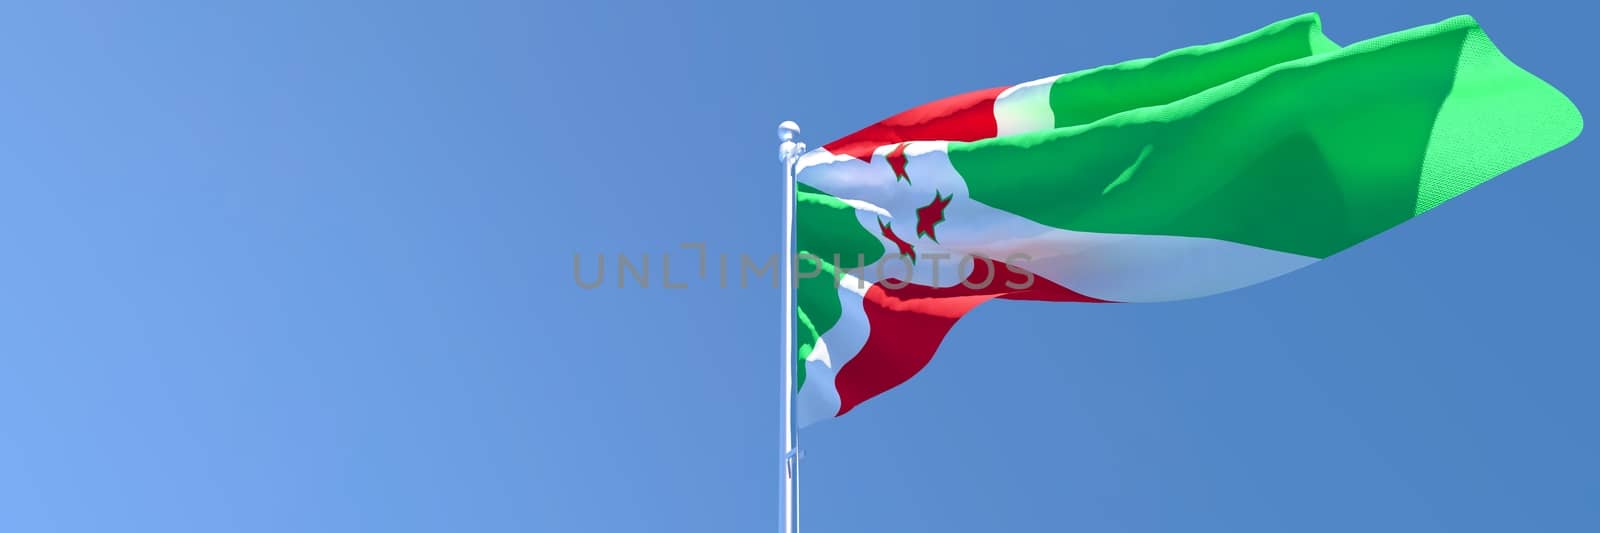 3D rendering of the national flag of Burundi waving in the wind against a blue sky